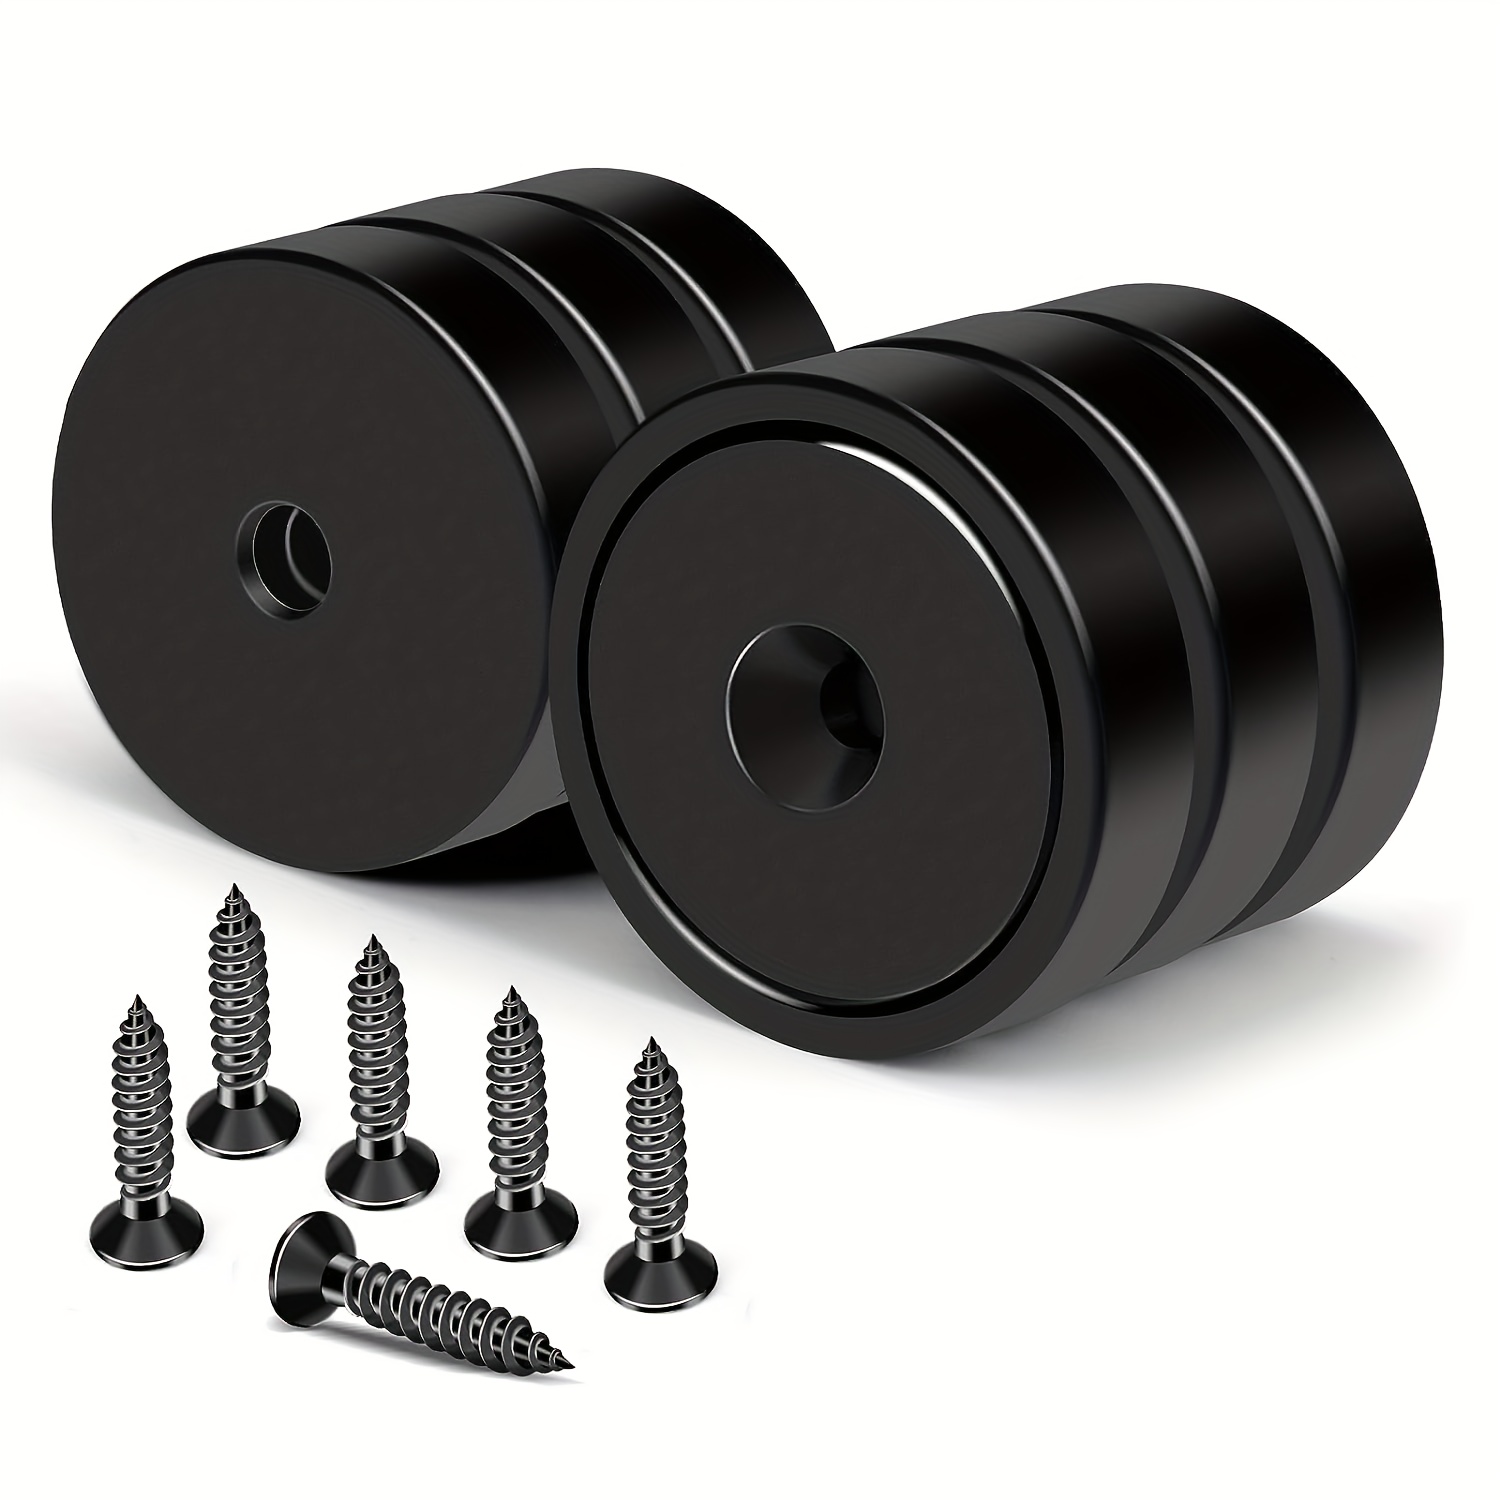 DK] Super Strong round Magnets